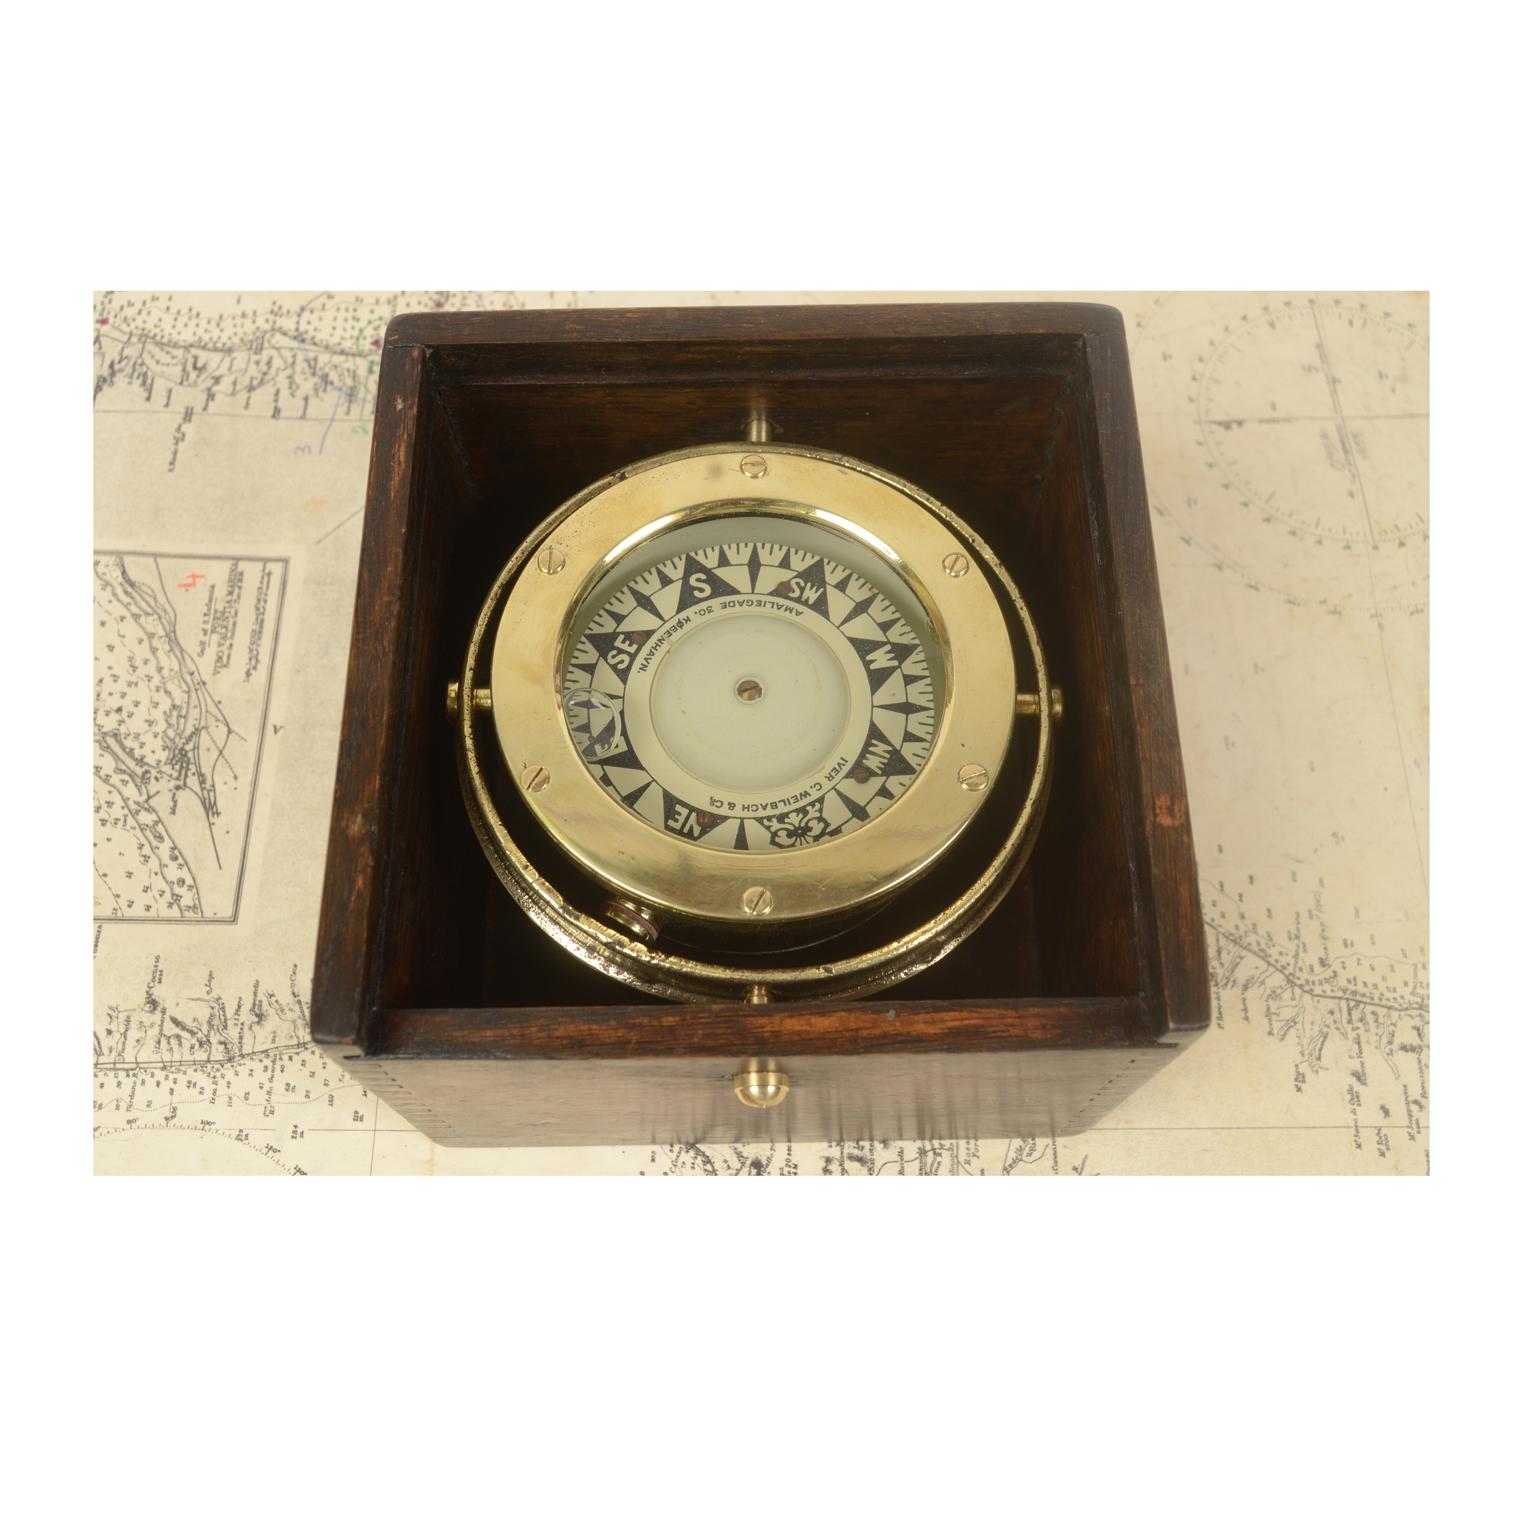 Nautical compass of brass and glass mounted on a universal joint and placed in its original oak box signed Iver C. Weilbach & C. Amaliegade 30 Copenhagen, made in the late 19th century. The compass is made up of a cylindrical vessel of brass and